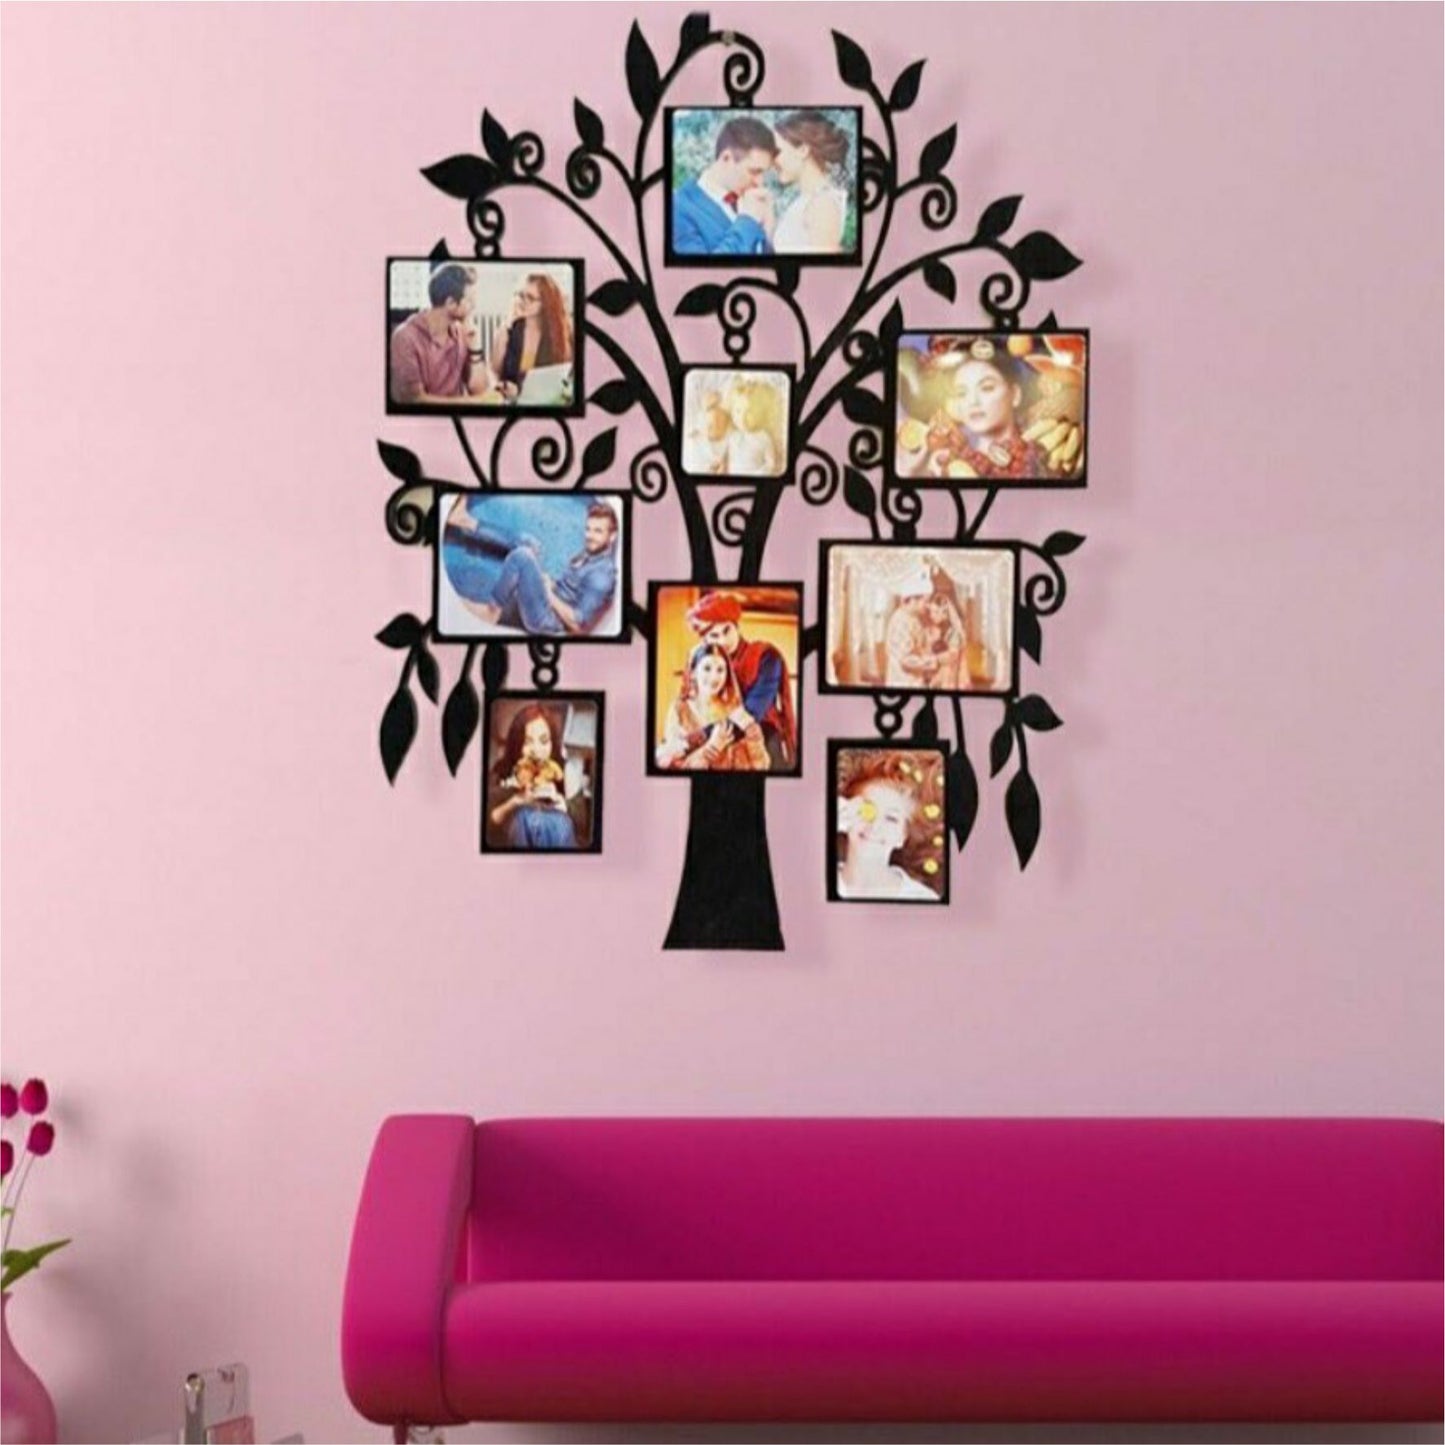 PERSONALIZED TREE FRAME